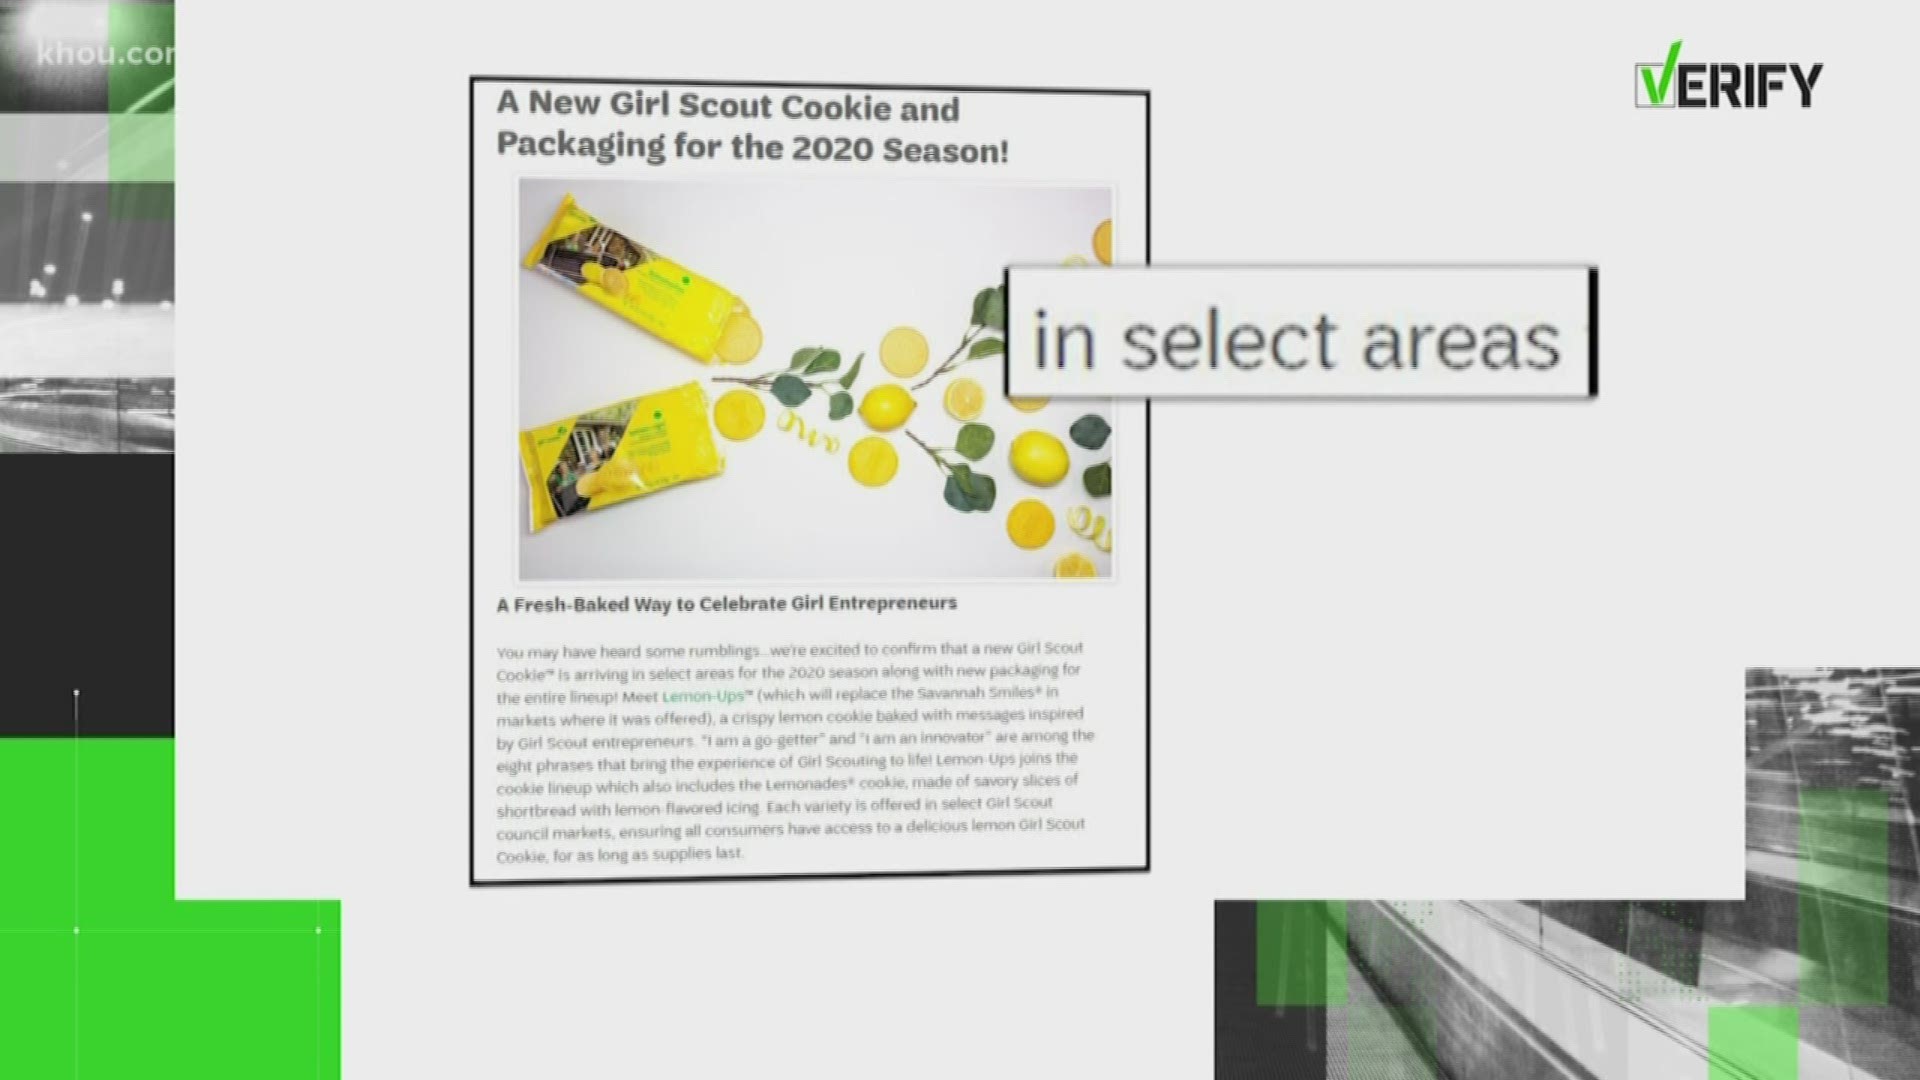 This year, Girl Scouts announced a new cookie hitting the booths: Lemon-Ups! However, the cookie won't be sold in the Houston area.